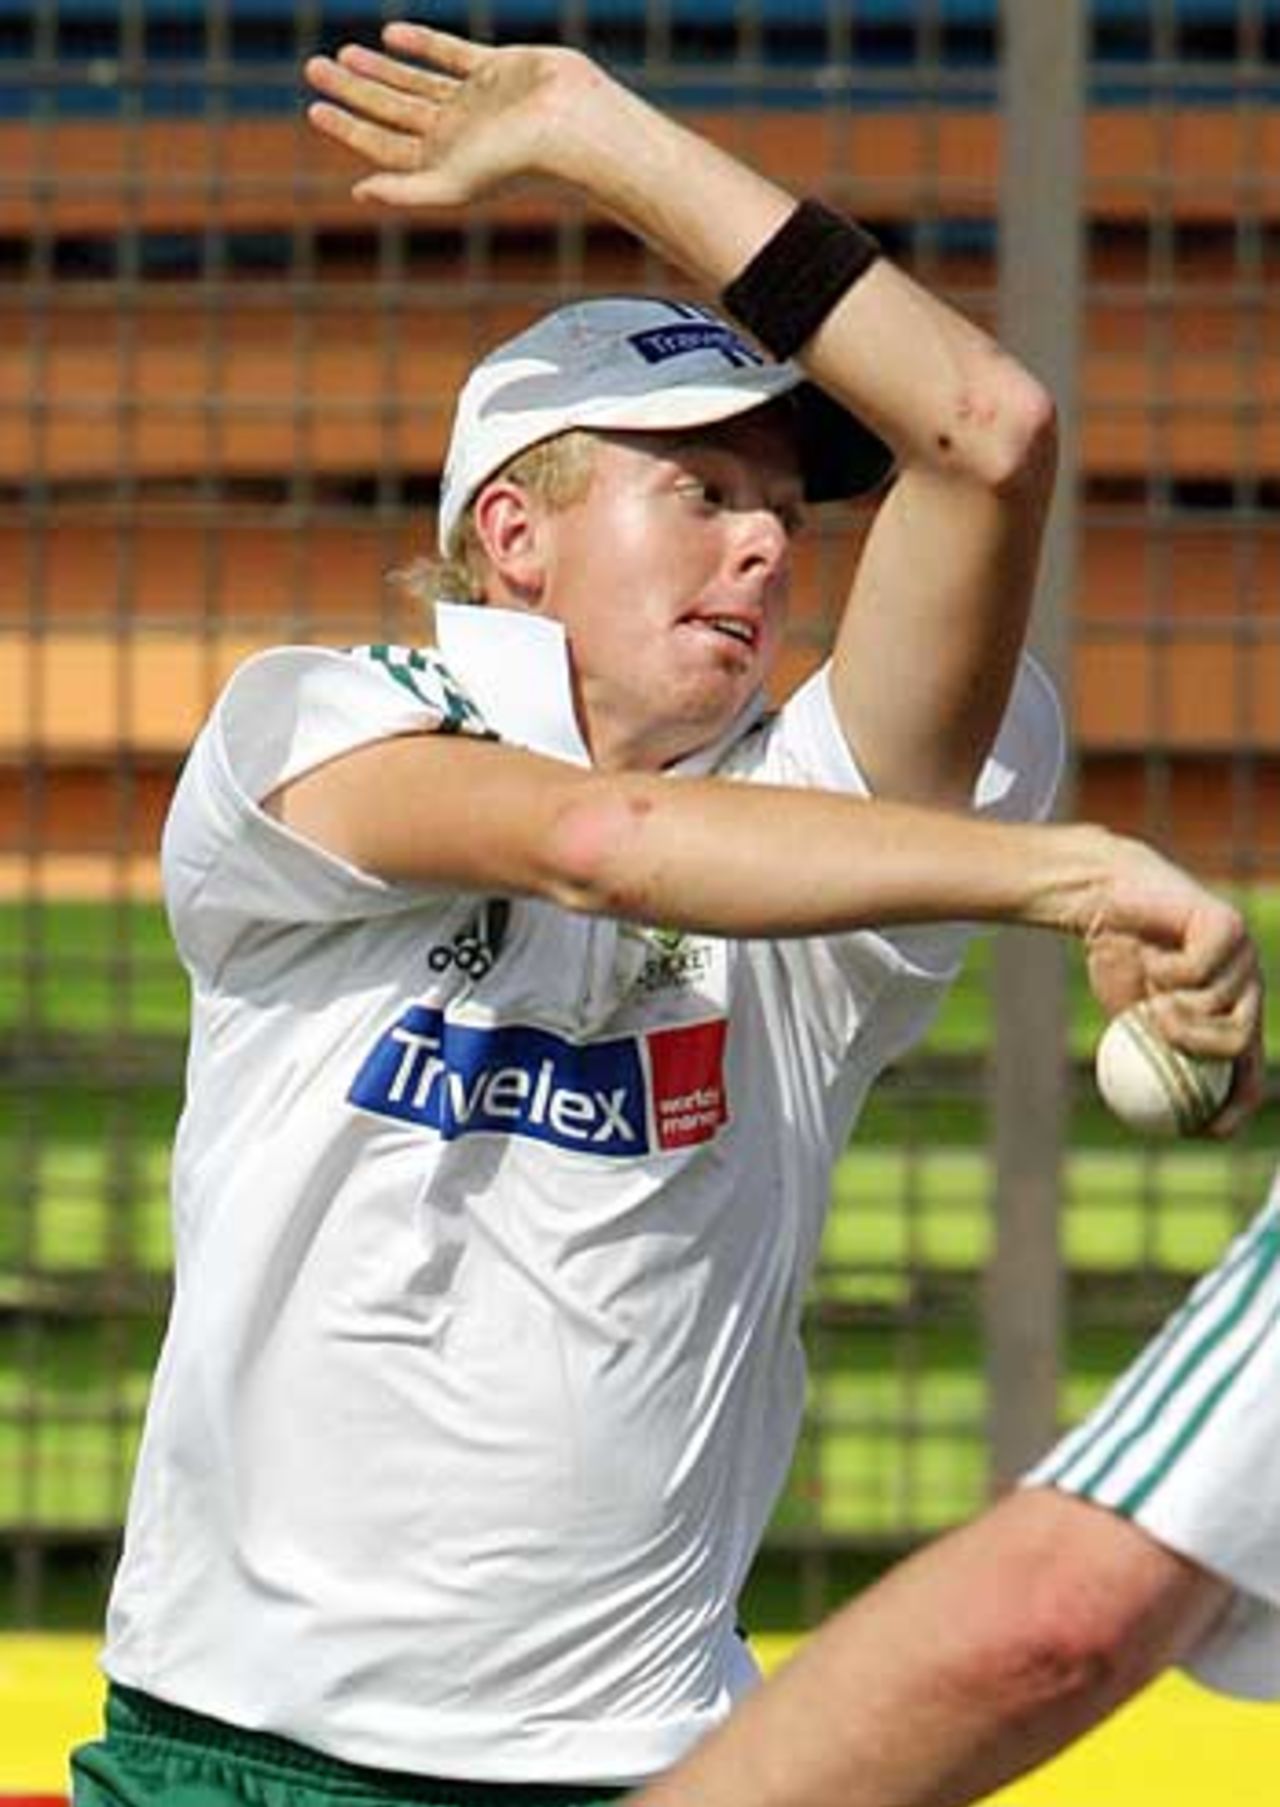 Dan Cullen bowls in the nets, Chittagong, April 22, 2006